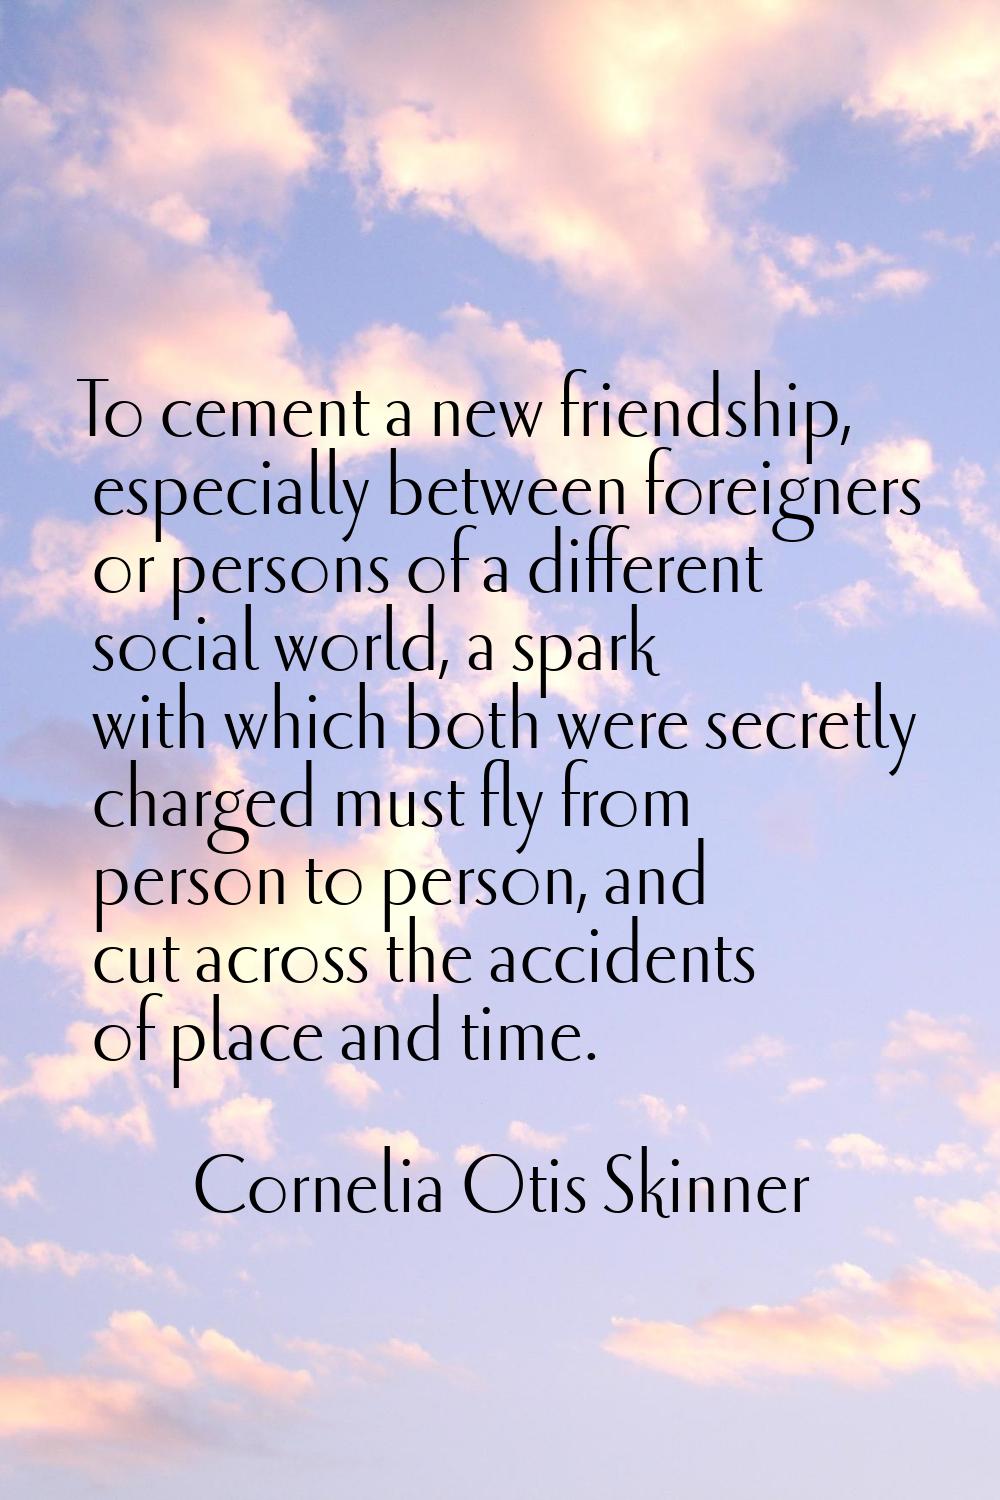 To cement a new friendship, especially between foreigners or persons of a different social world, a